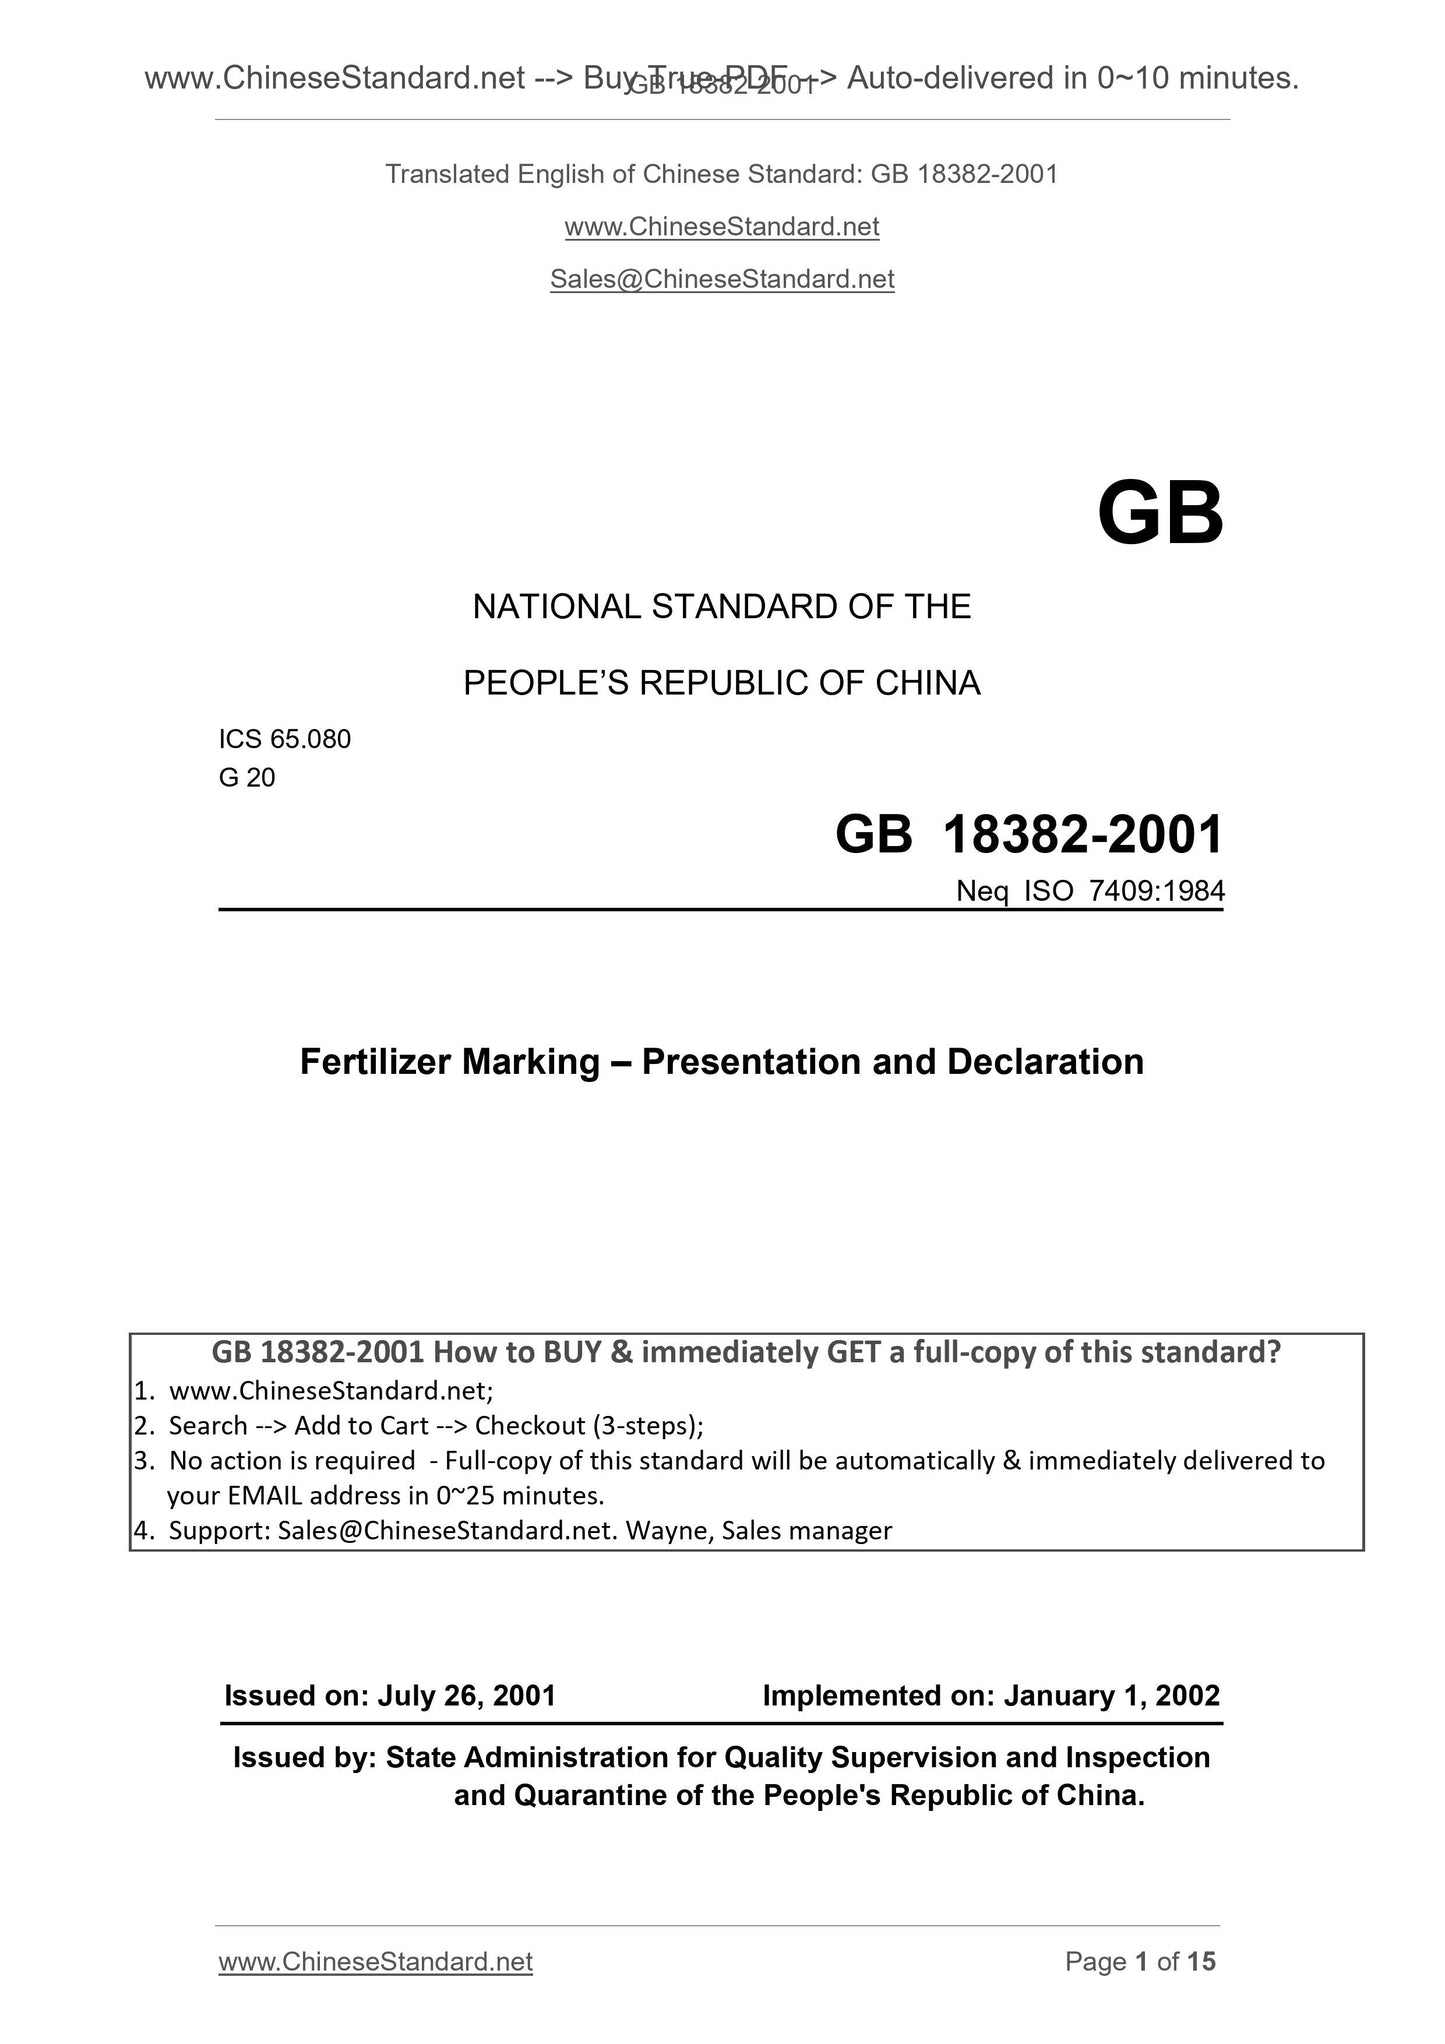 GB 18382-2001 Page 1